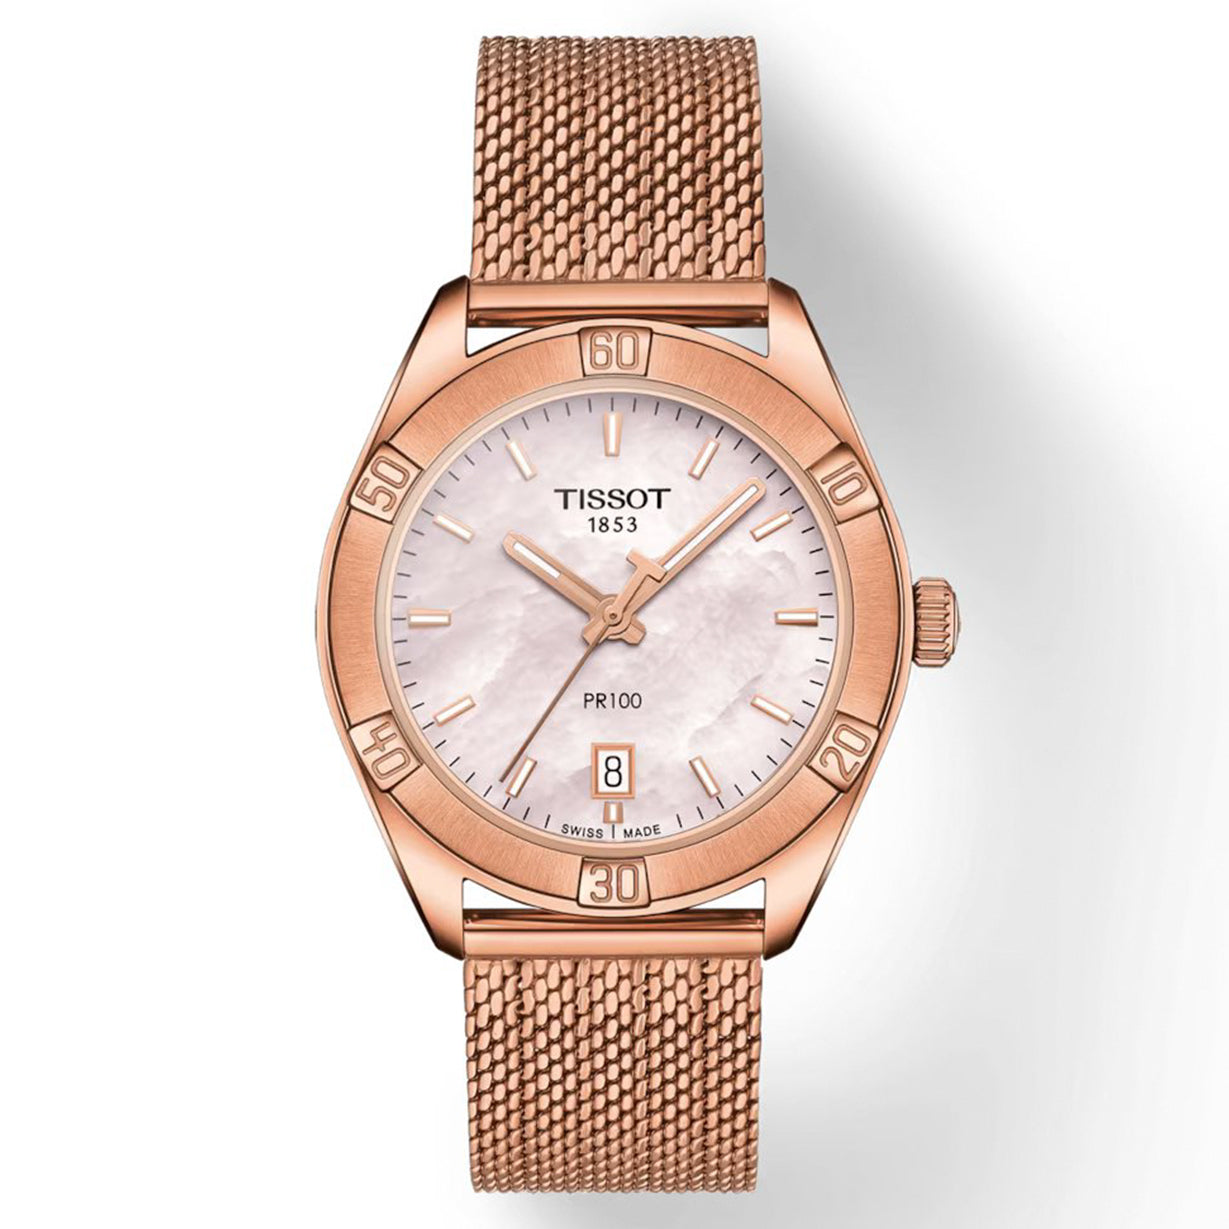 T-Classic PR 100 Sport Chic whitepink mother-of-pearl